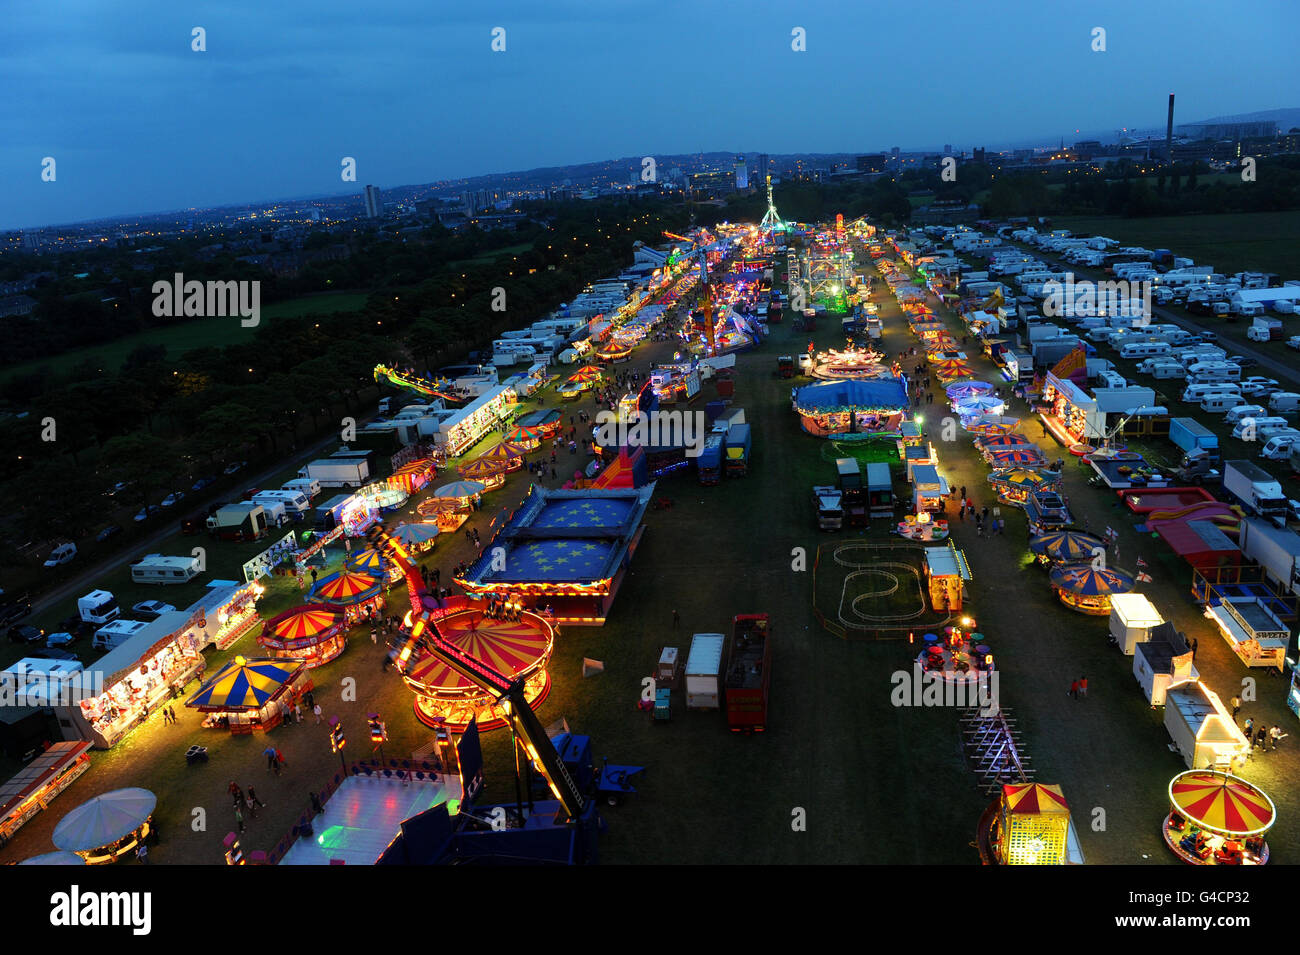 The bright lights of Hoppings Fair are seen in the evening light in Newcastle. Stock Photo